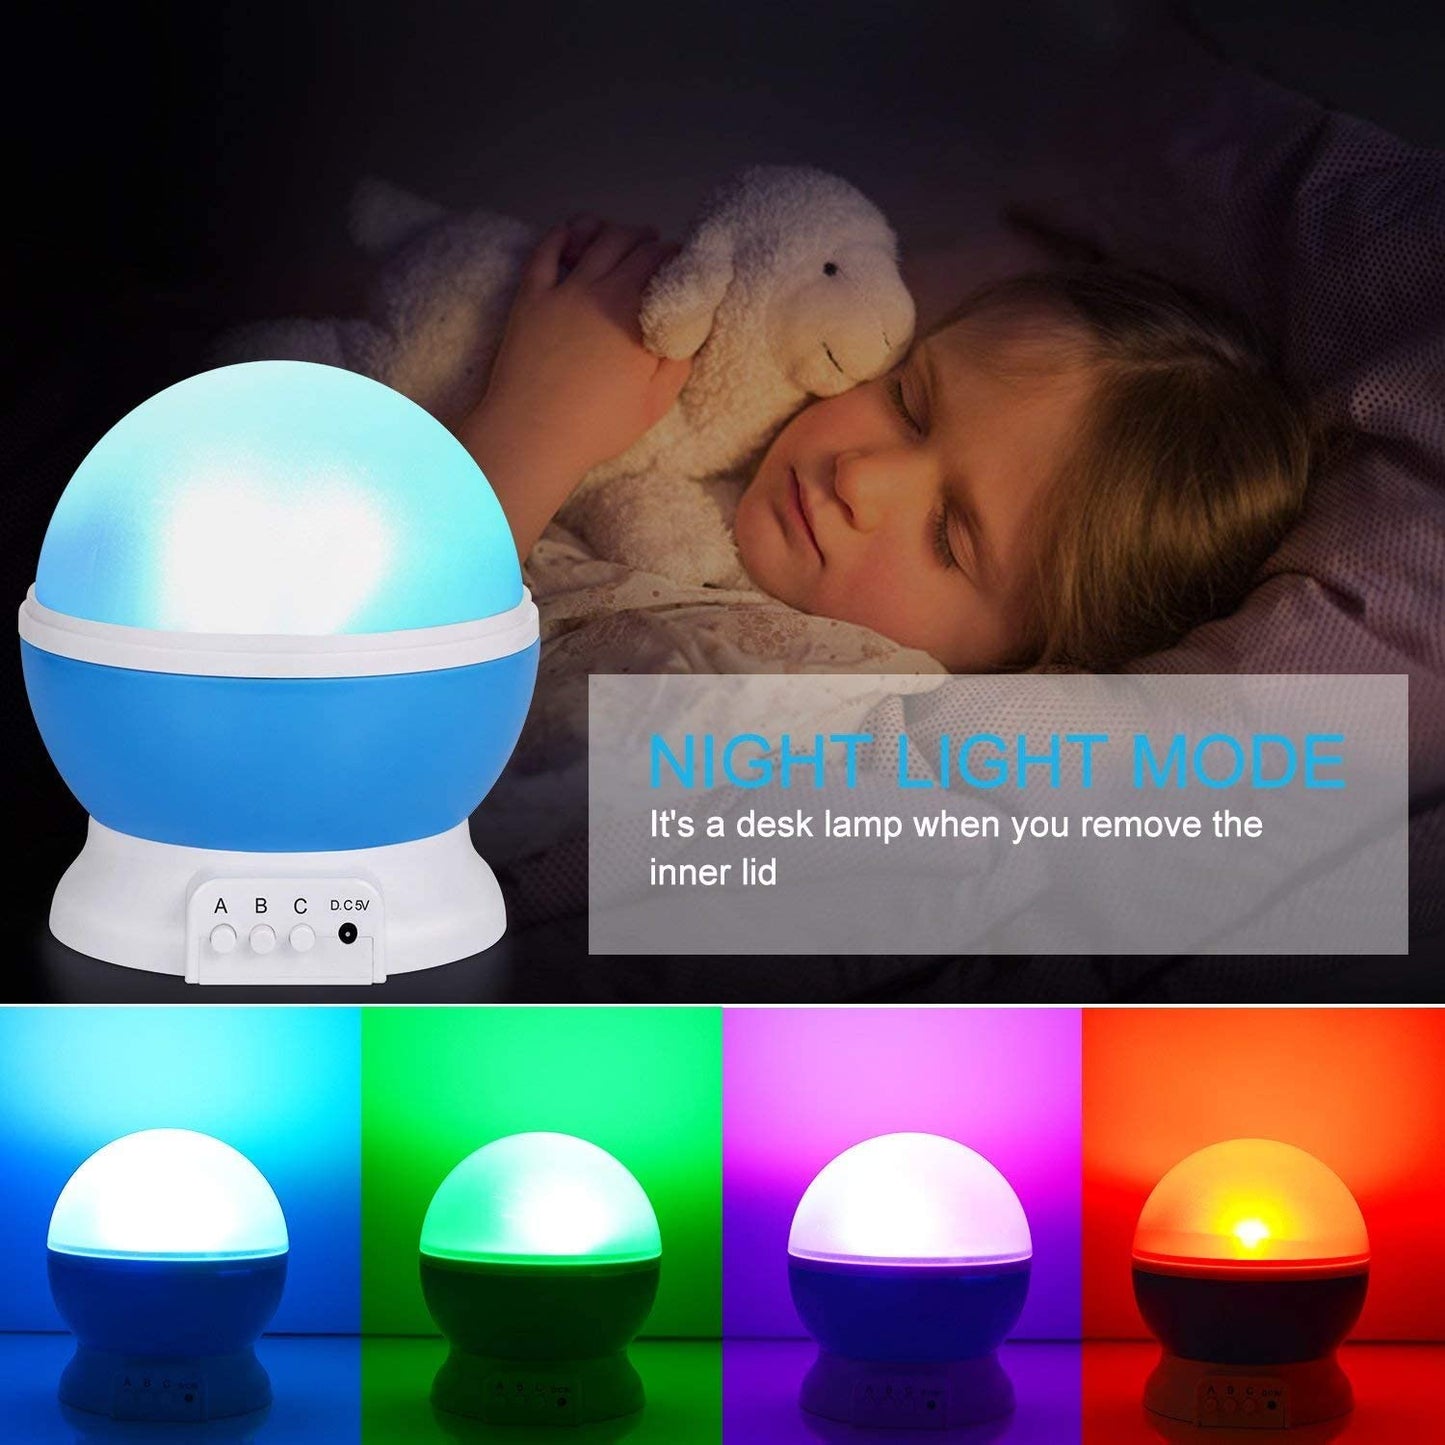 Rotating Projector Lamp cum Night Light Lamp, Star Projector LED Light Color Changing Lamp